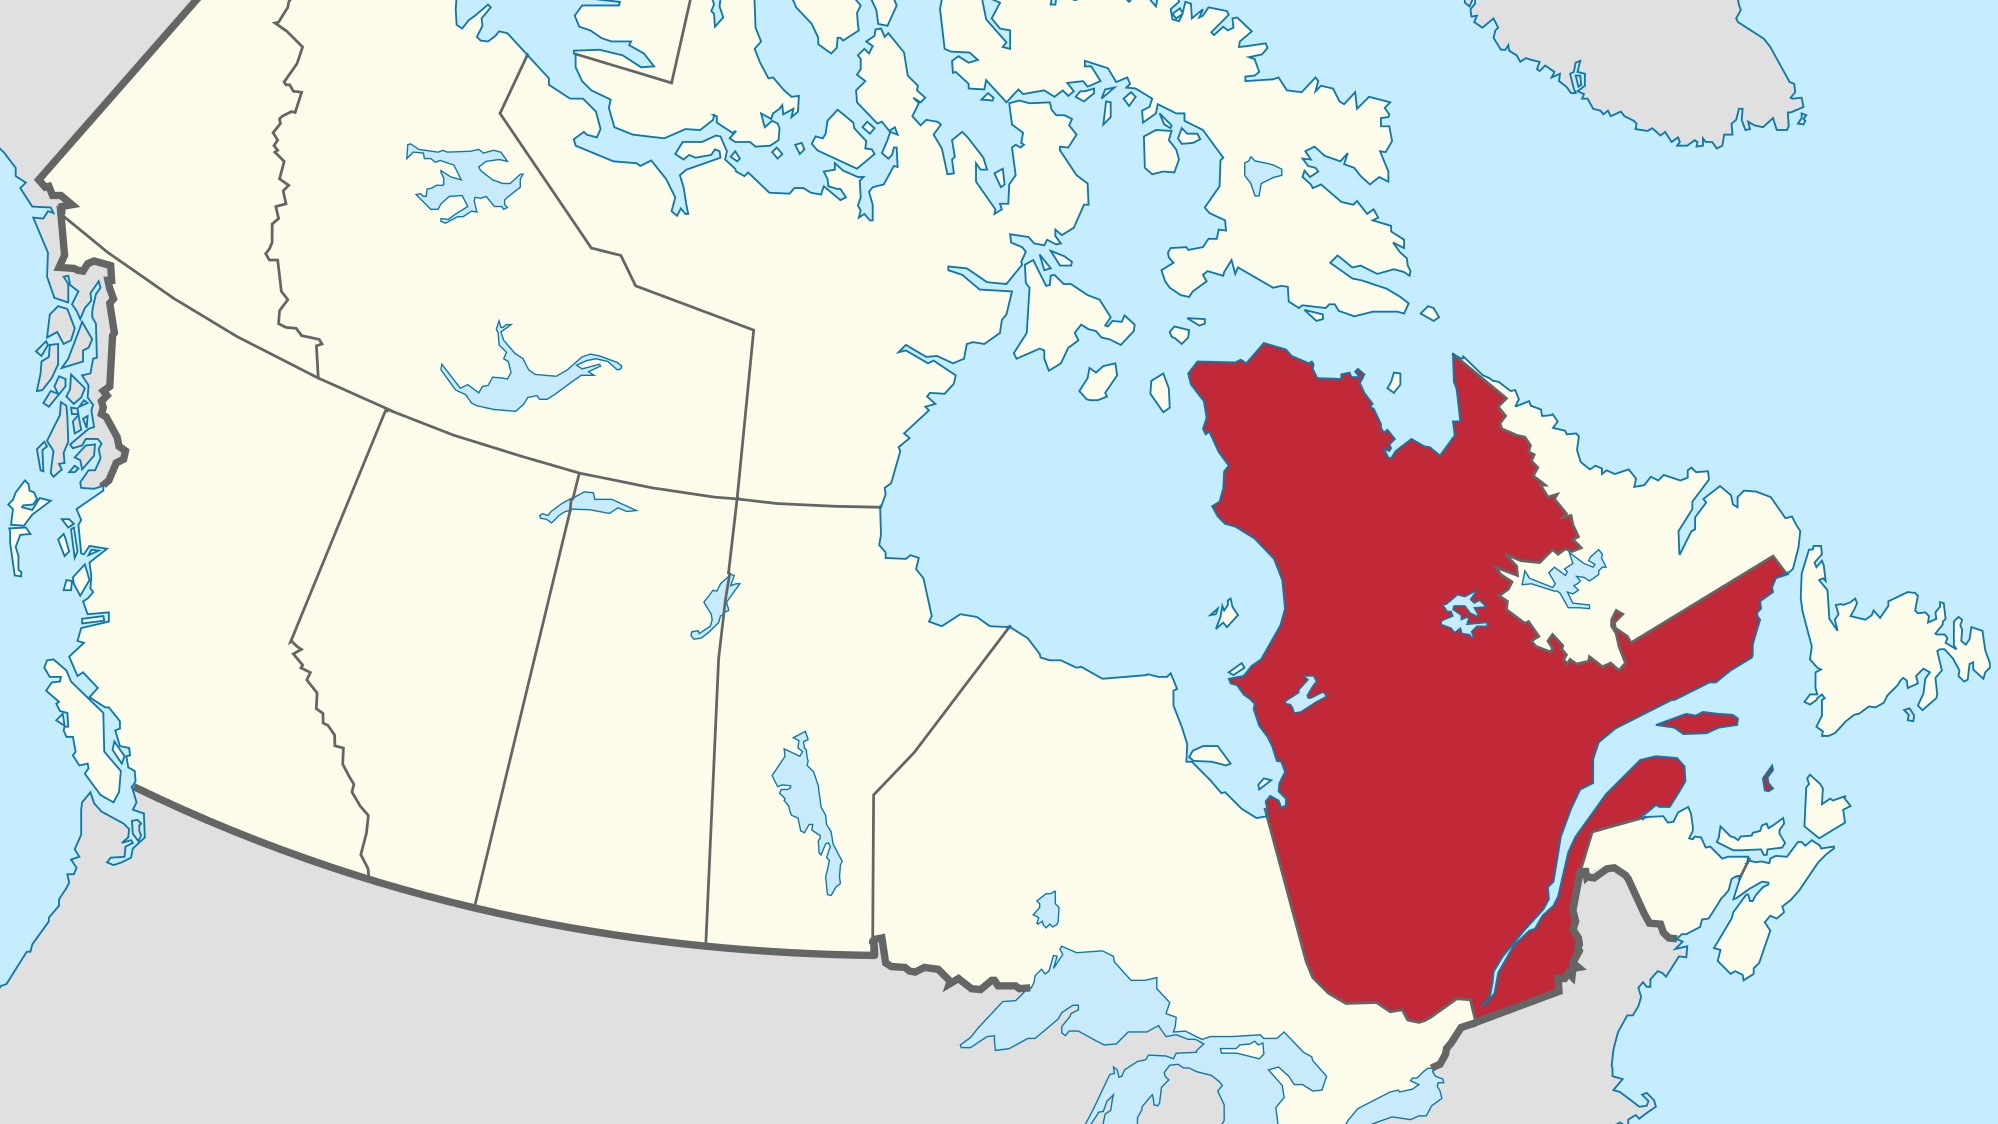 Province of Quebec in Canada